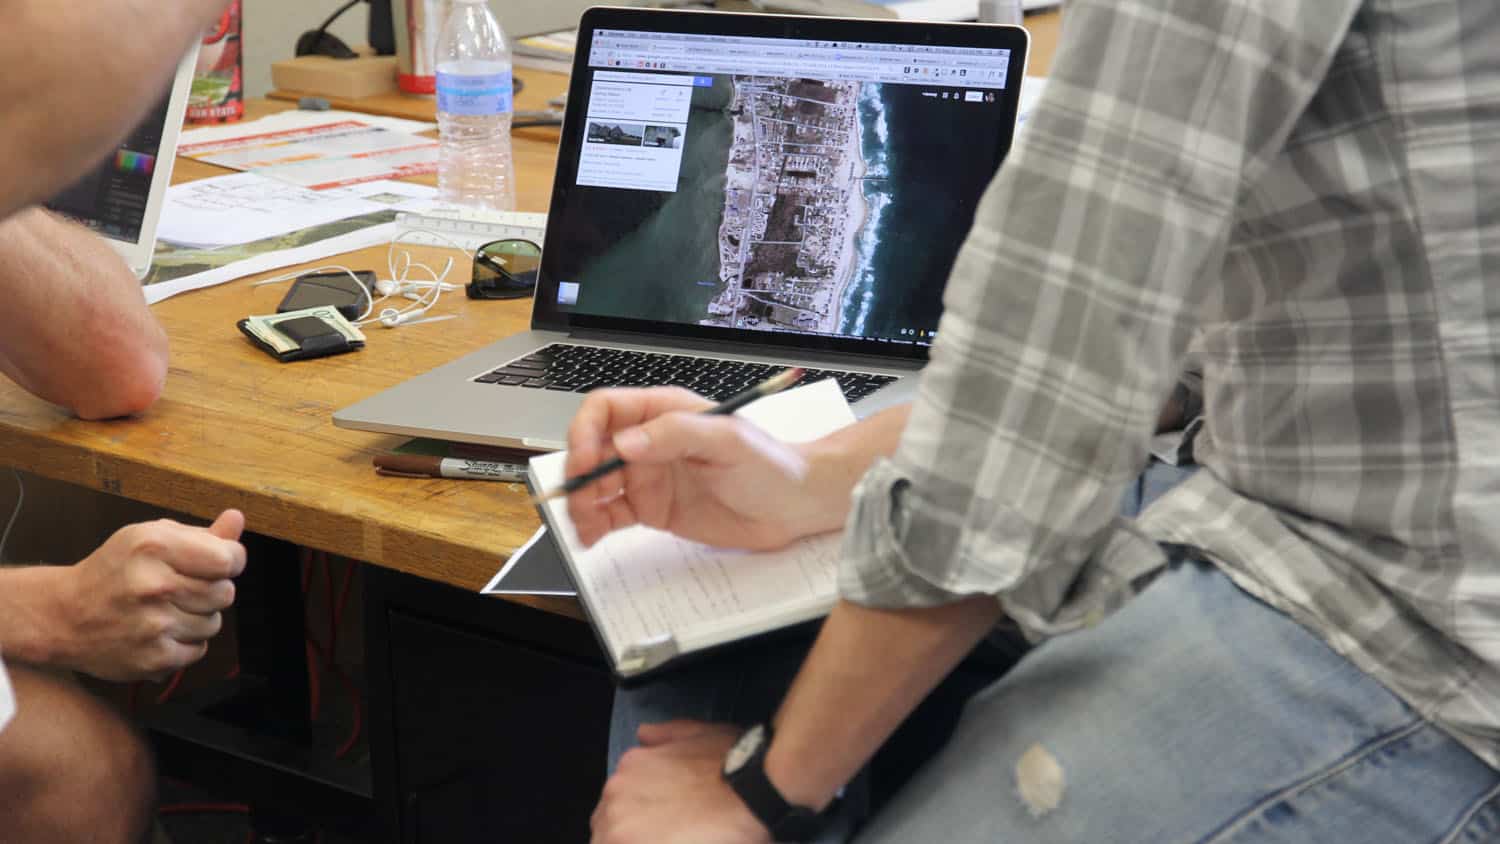 Doctoral design students work over a laptop in a space on campus; the laptop displays an overhead view of a coastal community.